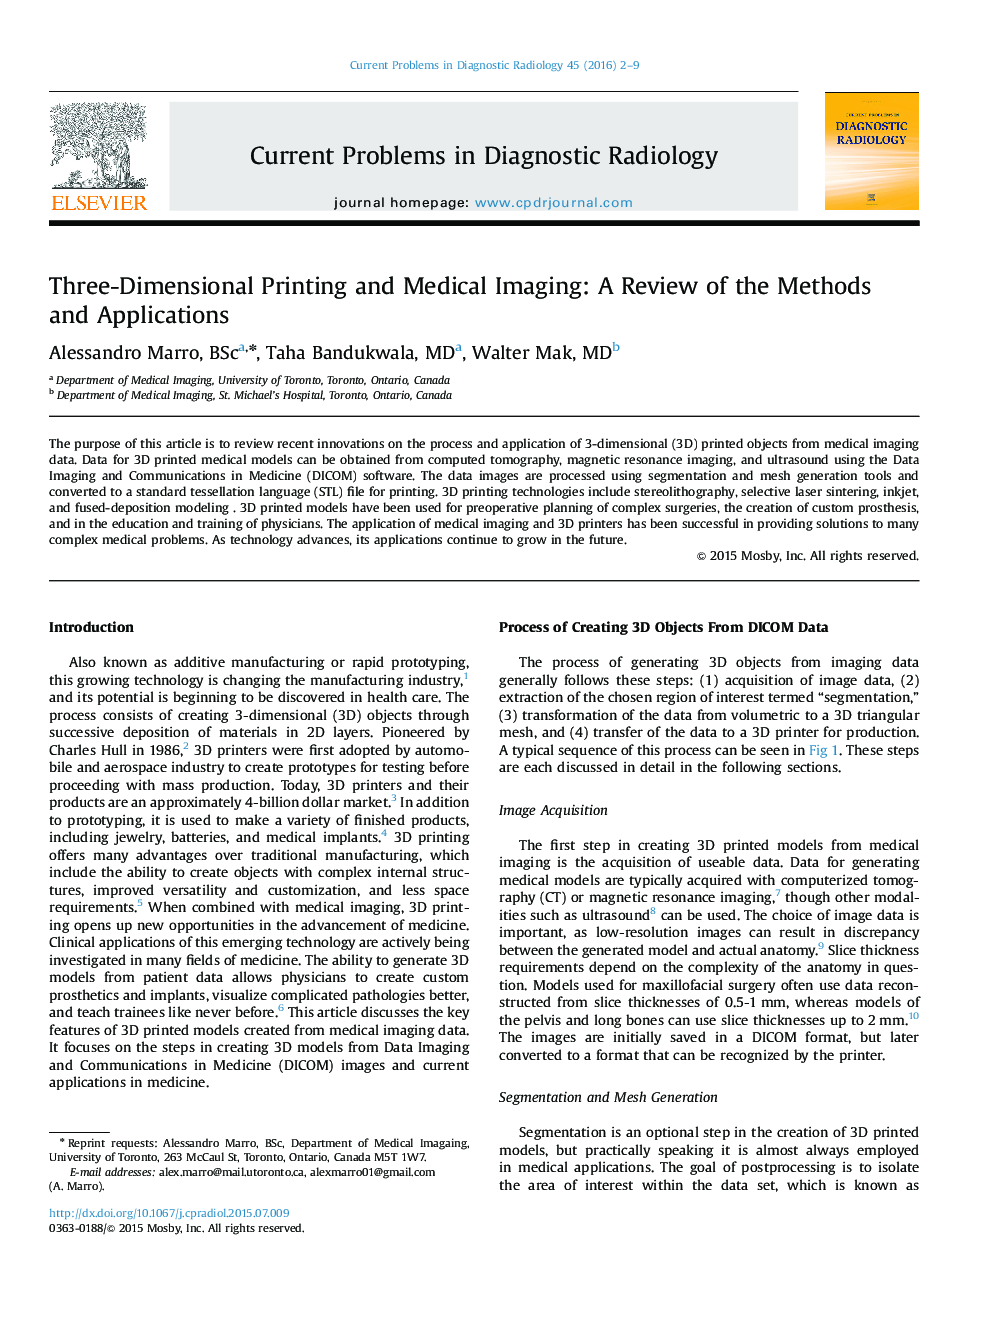 Three-Dimensional Printing and Medical Imaging: A Review of the Methods and Applications